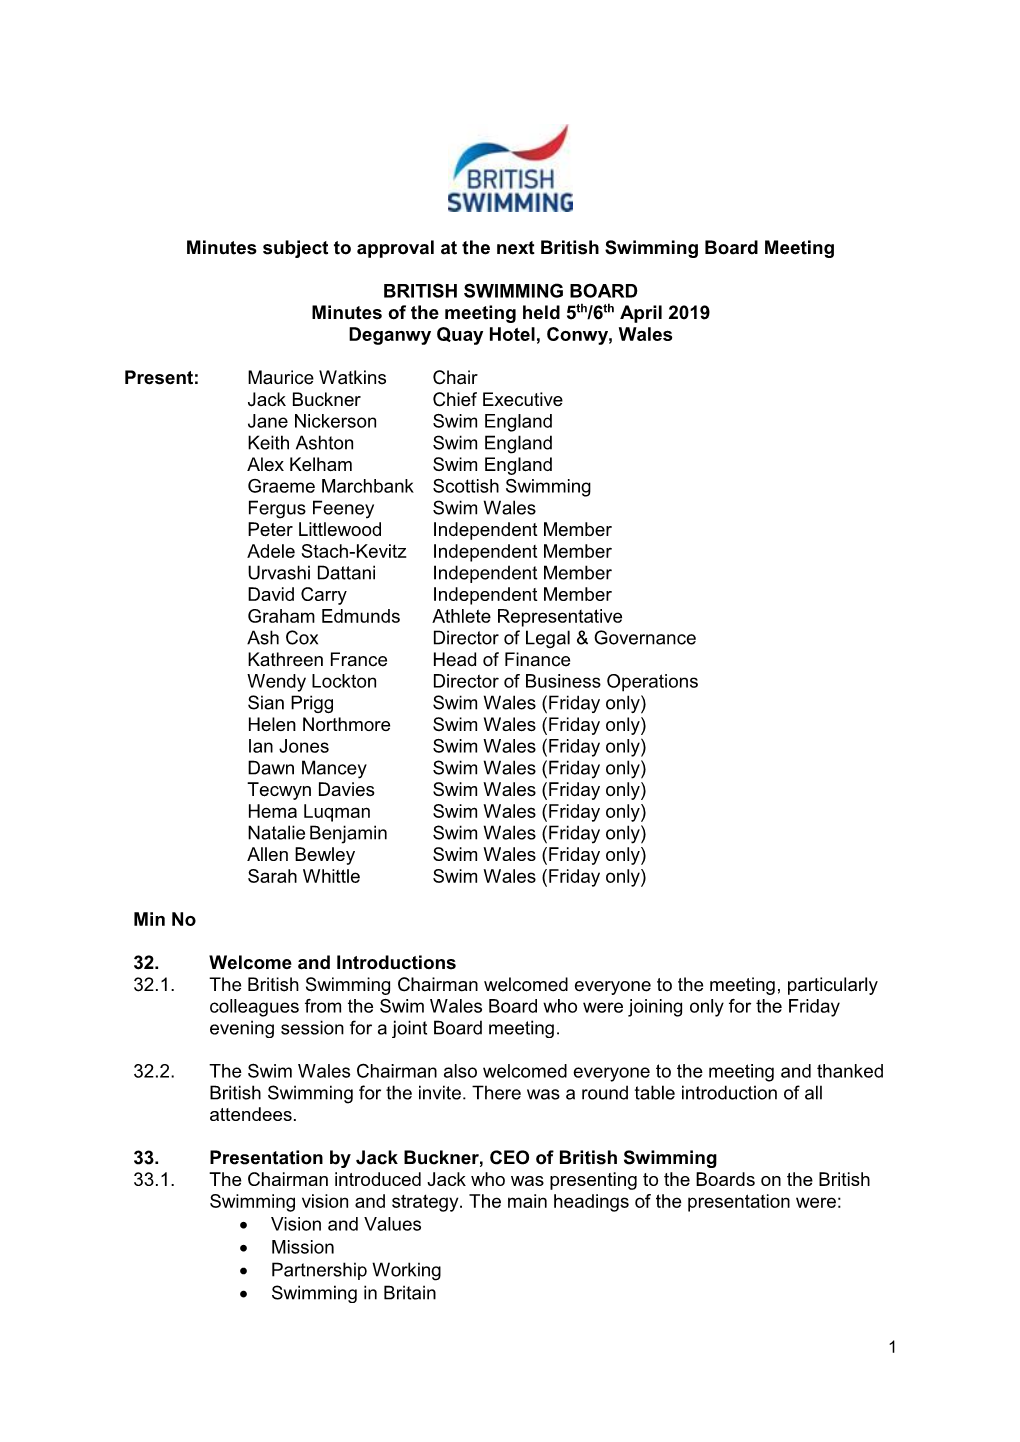 Minutes Subject to Approval at the Next British Swimming Board Meeting